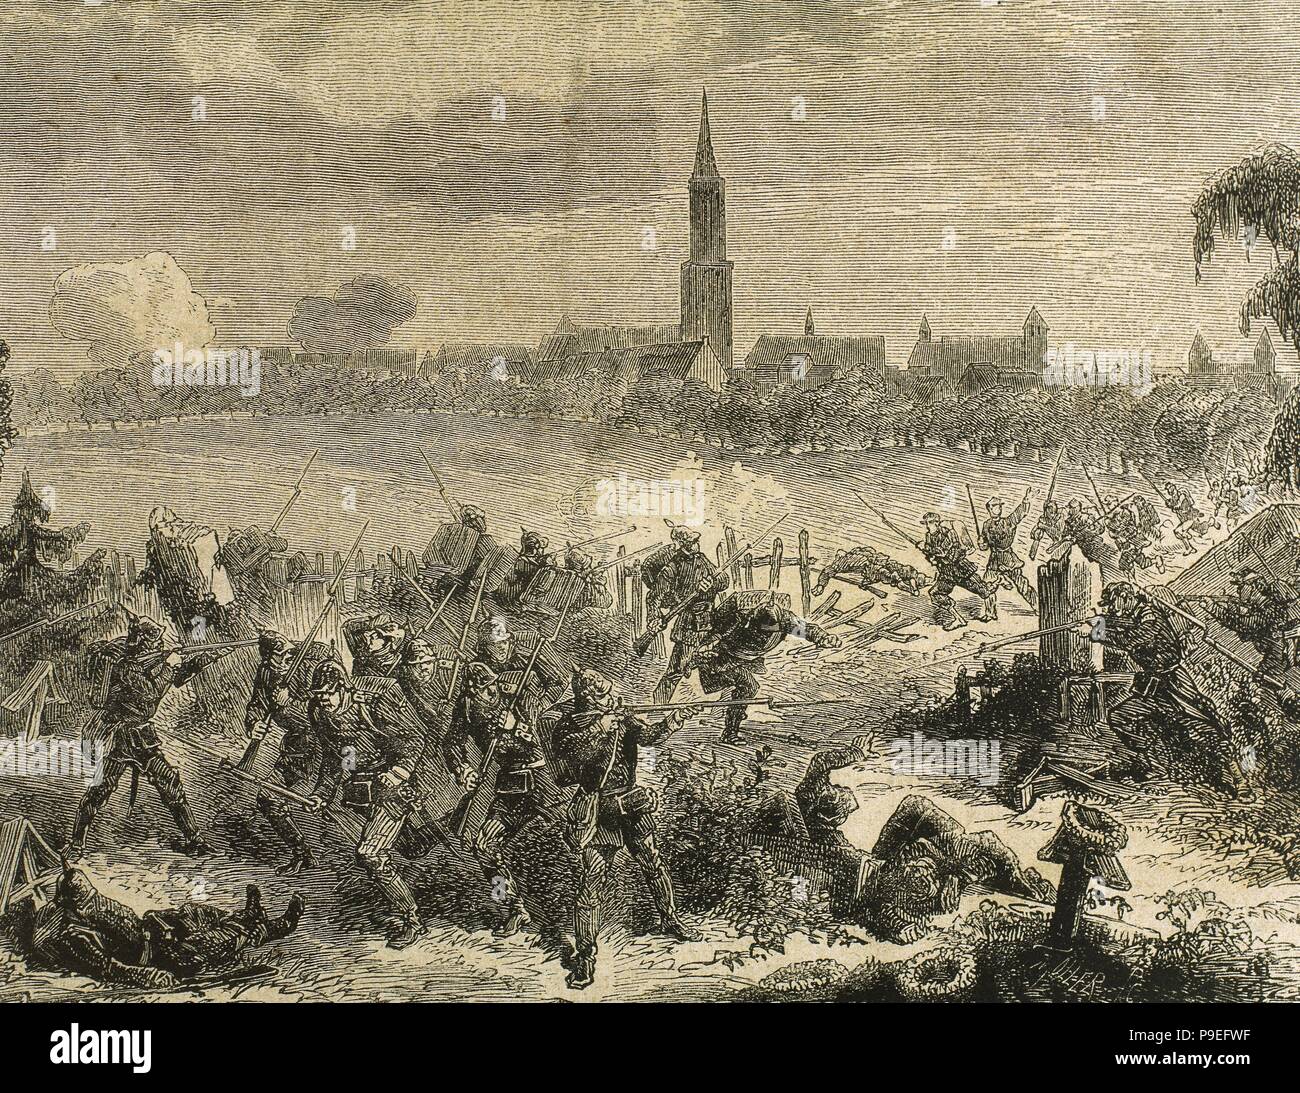 Franco-Prussian War (1870-1871). Combat of the garrison of Strasbourg with the Prussians camped in the cemetery of Saint Elena. Engraving. 'La Ilustracion Espanola y Americana', 1879. Stock Photo